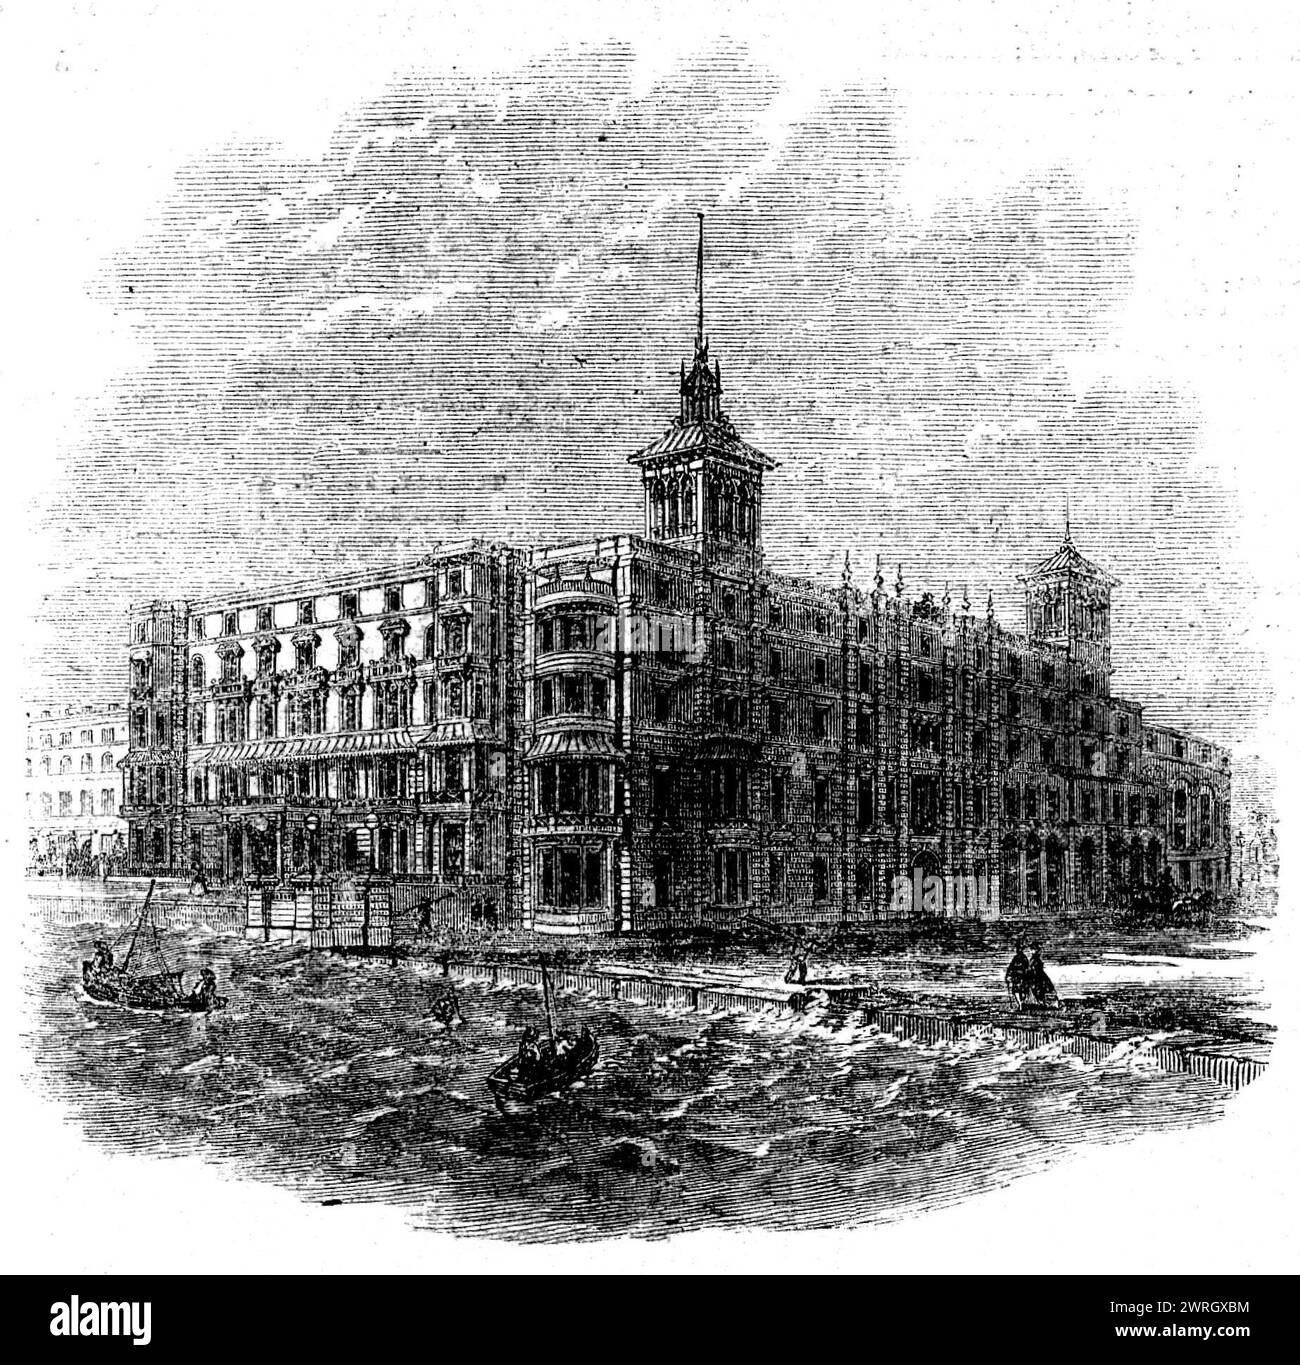 The Queen's Hotel, Hastings, 1862. 'This fine hotel, which has been some three or four years building, is now complete and in course of being finished. It stands, it will be seen, with its principal front on the parade, while the side front, on a different level and of a.different elevation, looks on a wide opening from the sea inland. Under the archway, in the centre of the side front, is the carriage-entrance, where visitors may alight under cover. Another grand entrance is the porch in the principal front; while families resident in the hotel who desire privacy can use a fine staircase and Stock Photo